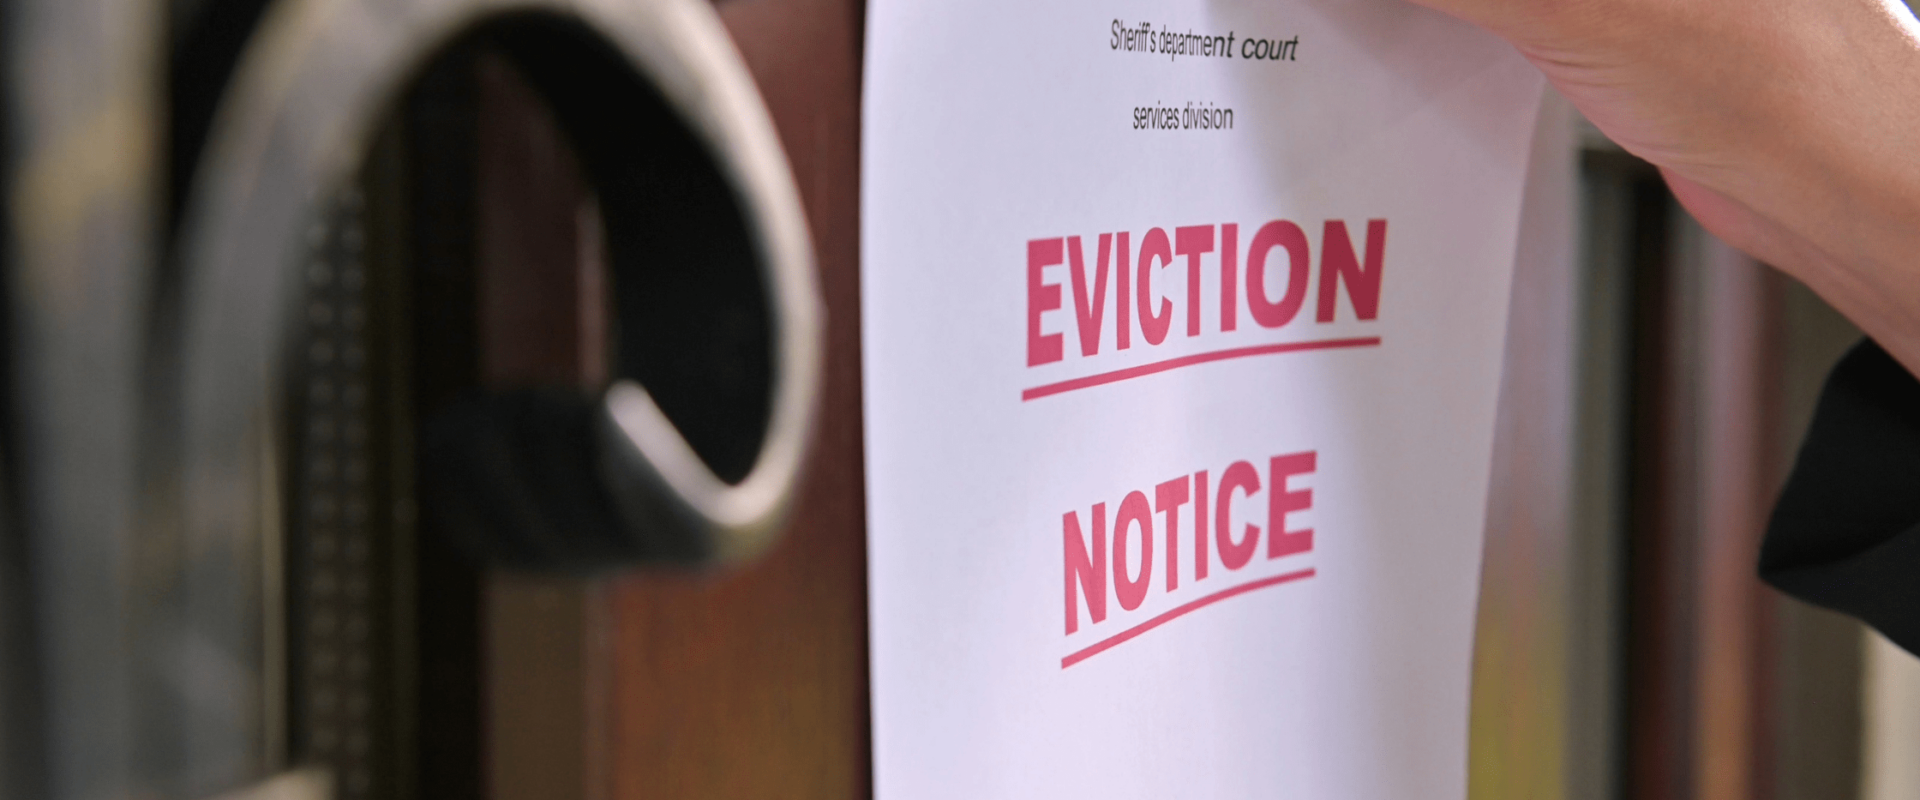 How Long Does Eviction Take in Florida?